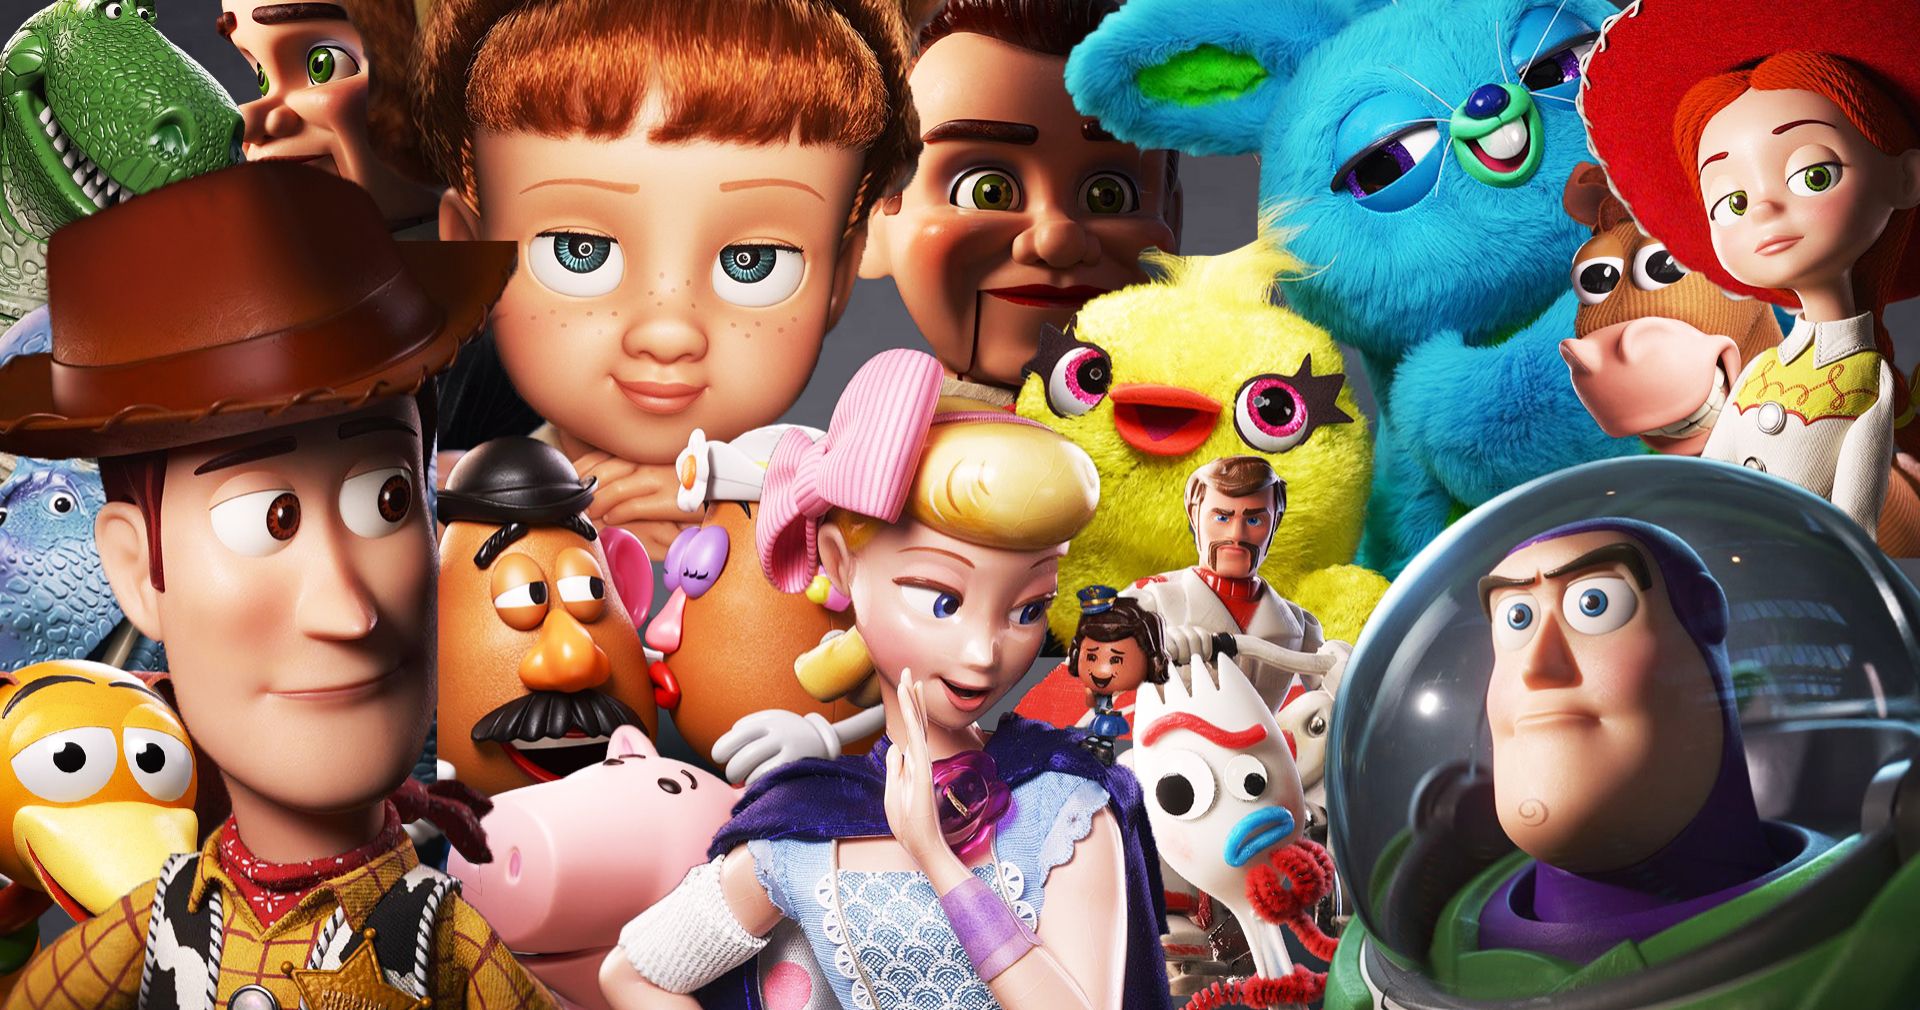 Toy Story 4 Review: An Amazing Film That Exceeds Expectations